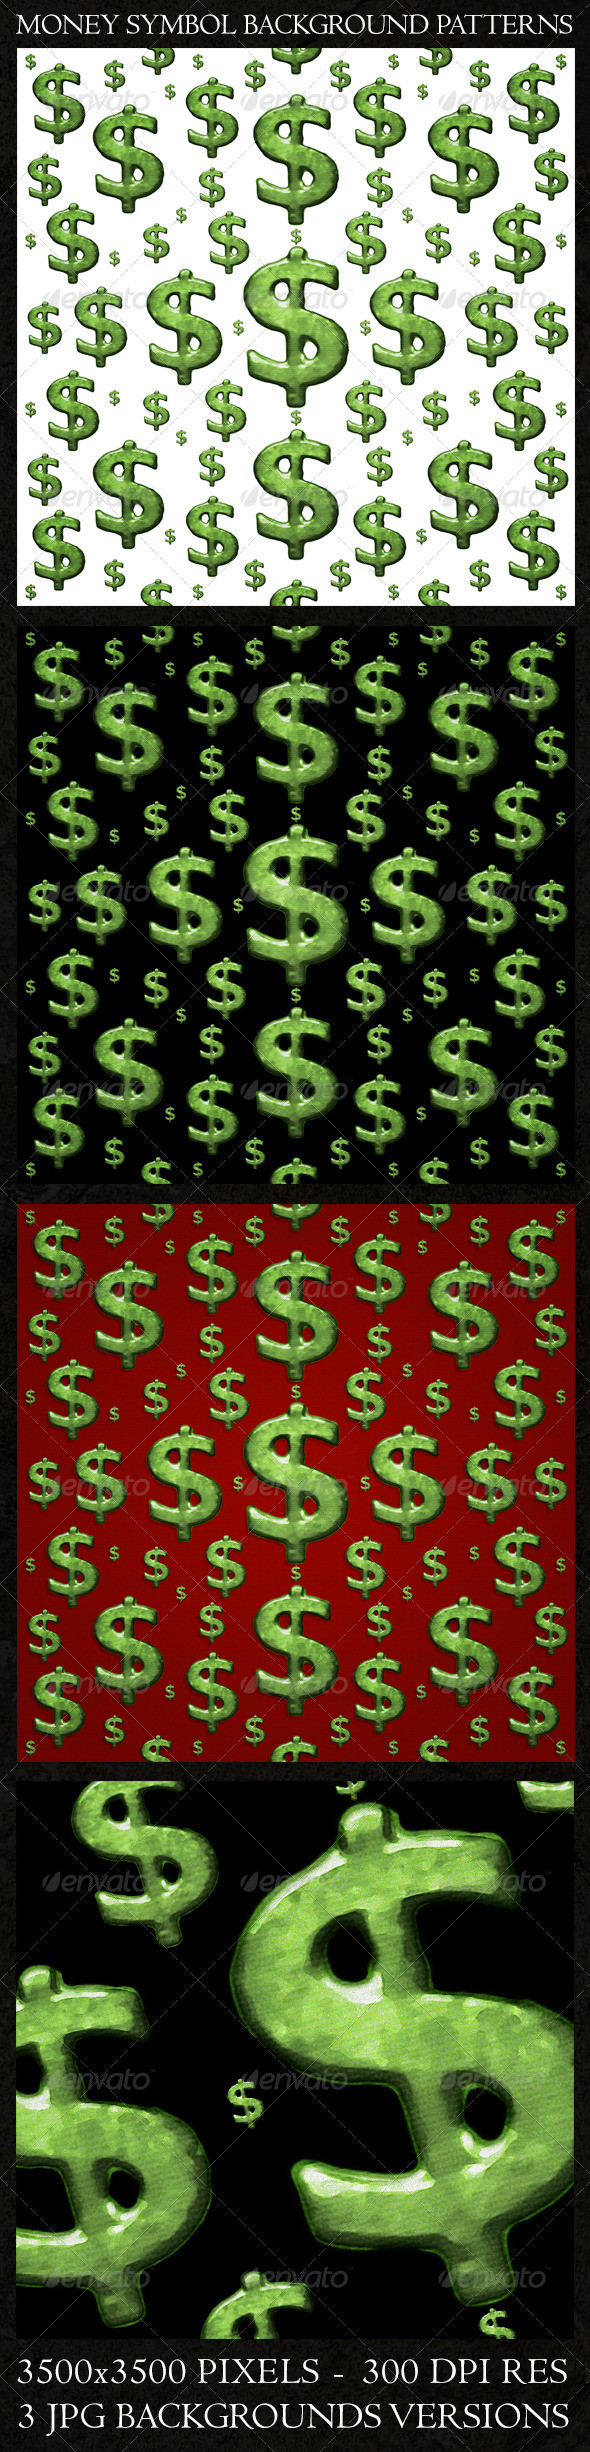 Preview money symbol background patterns